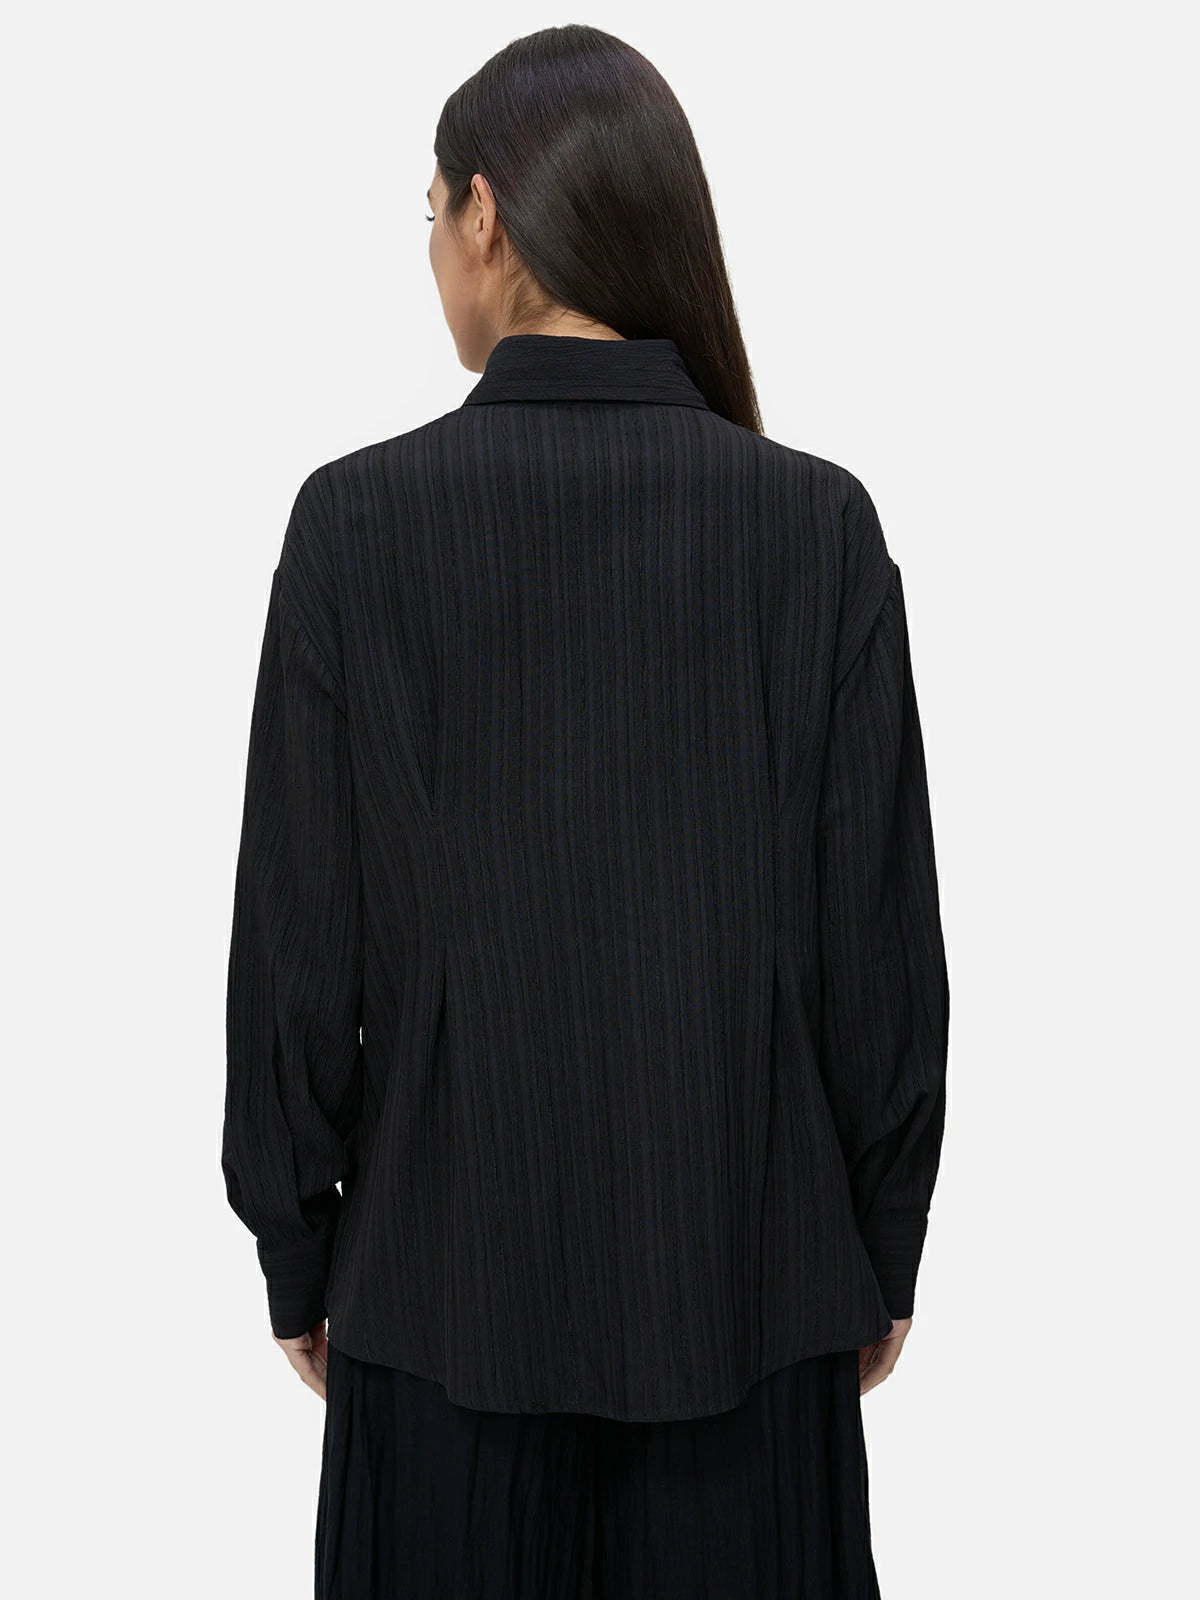 Distinctive black shirt with intricate striped patterns